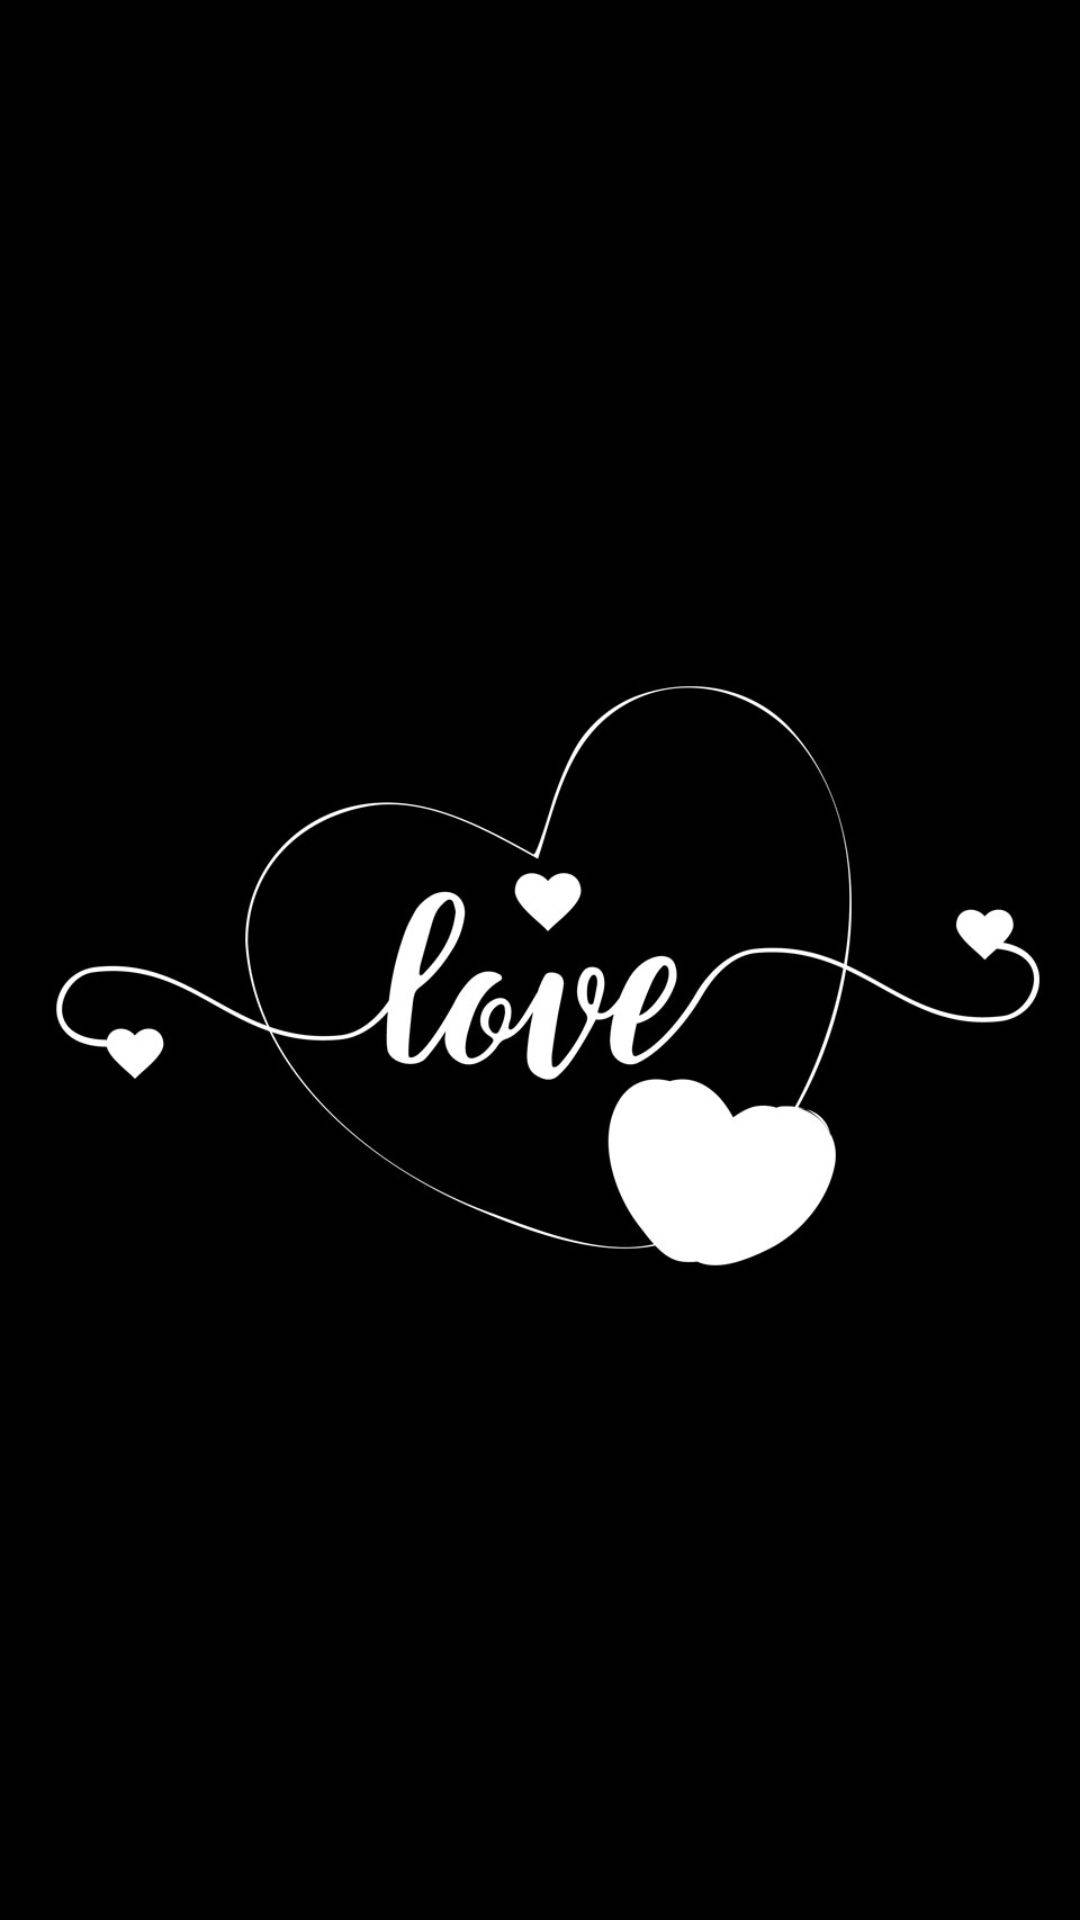 Love On A Black Heart Background